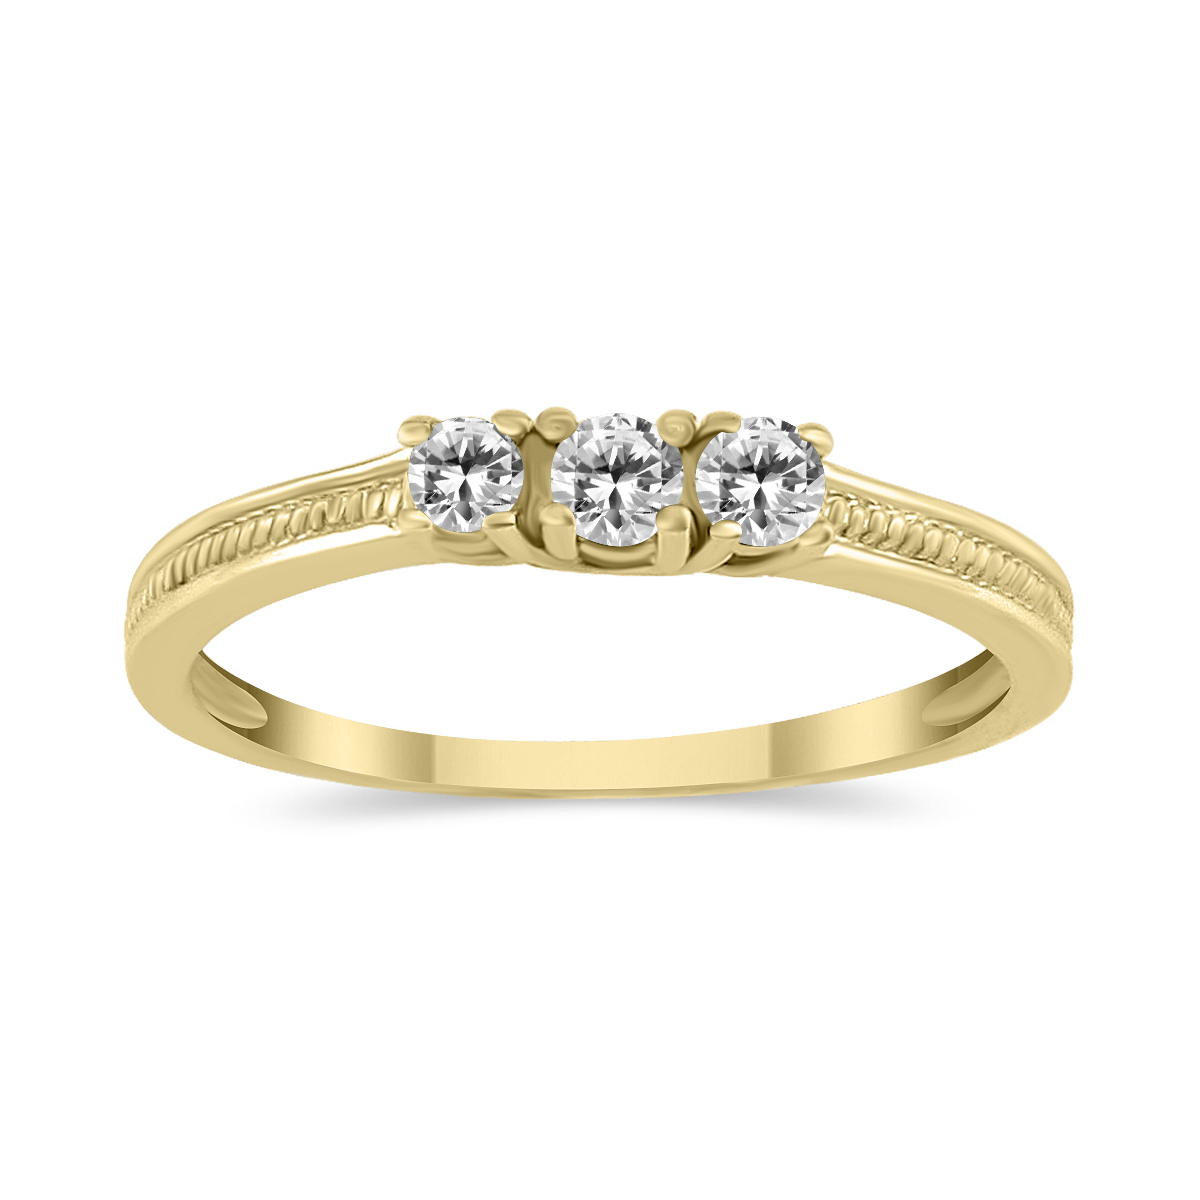 Image of 1/4 Carat TW Natural Diamond Three Stone Ring in 10K Yellow Gold